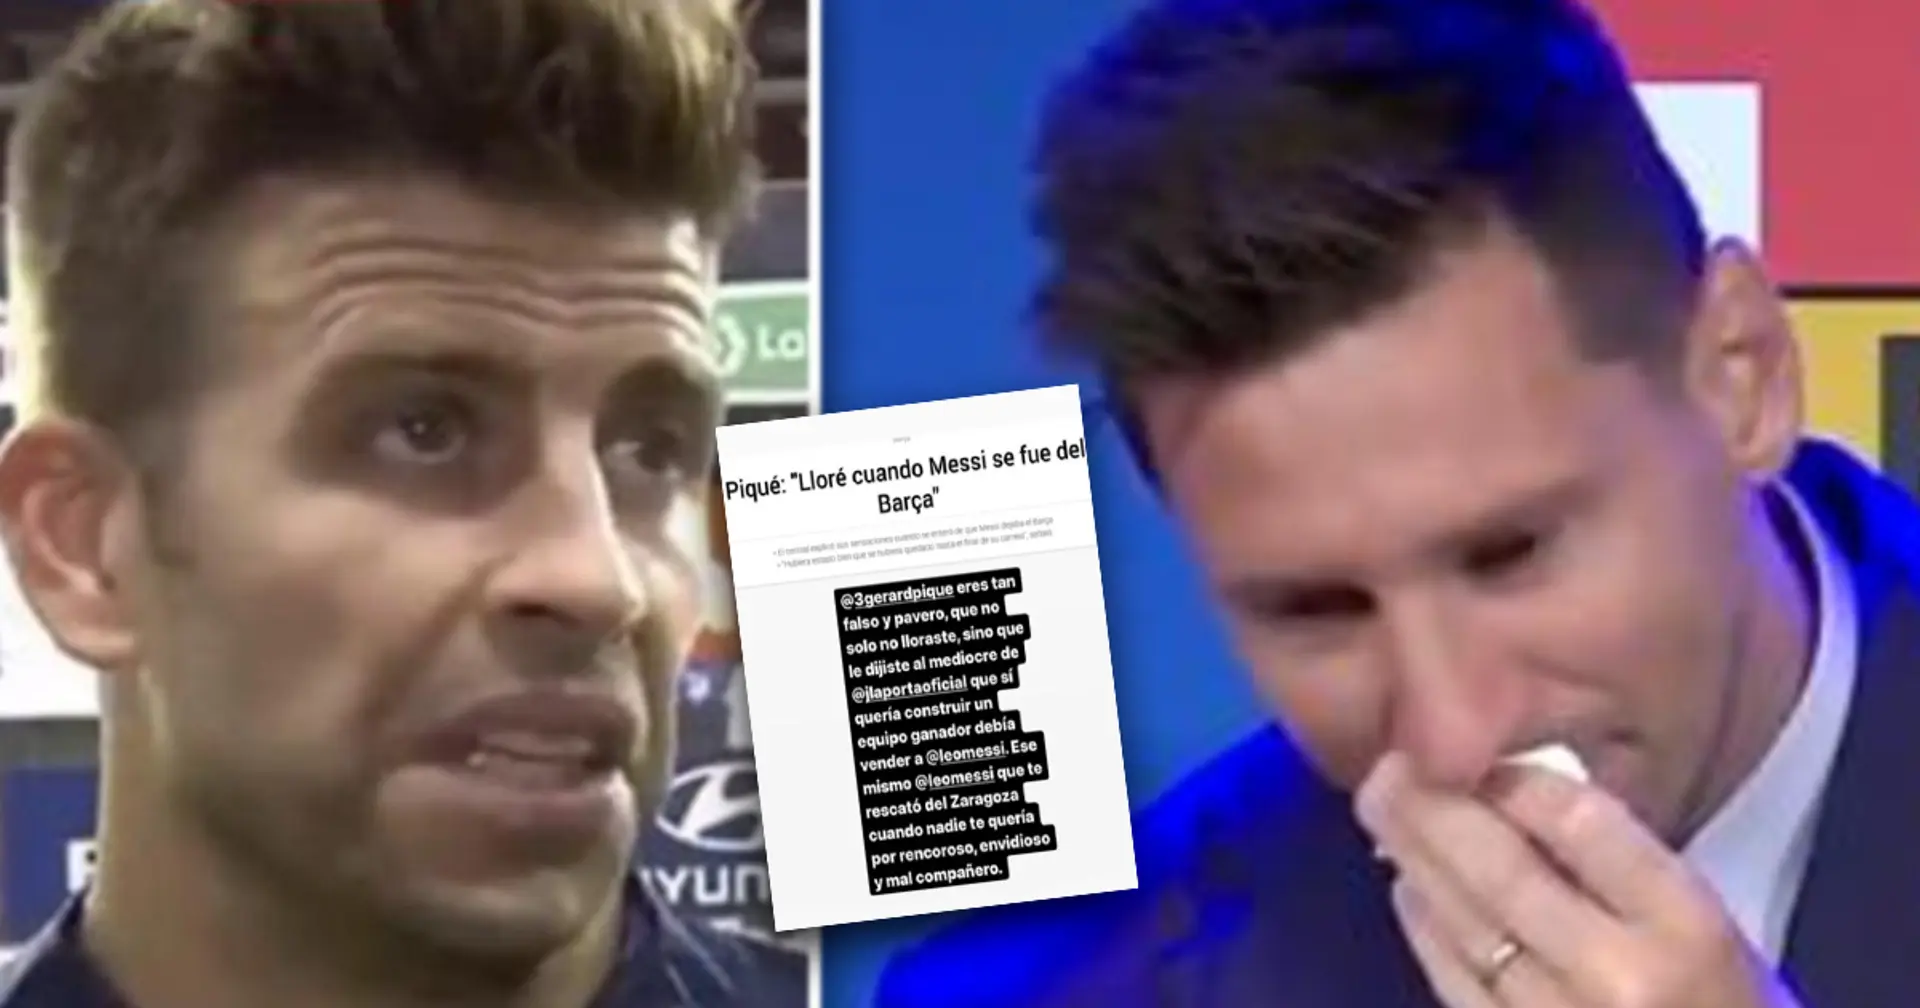 'You are so wrong and pathetic. You asked Laporta to sell Leo': Messi's family friend publicly slams Pique